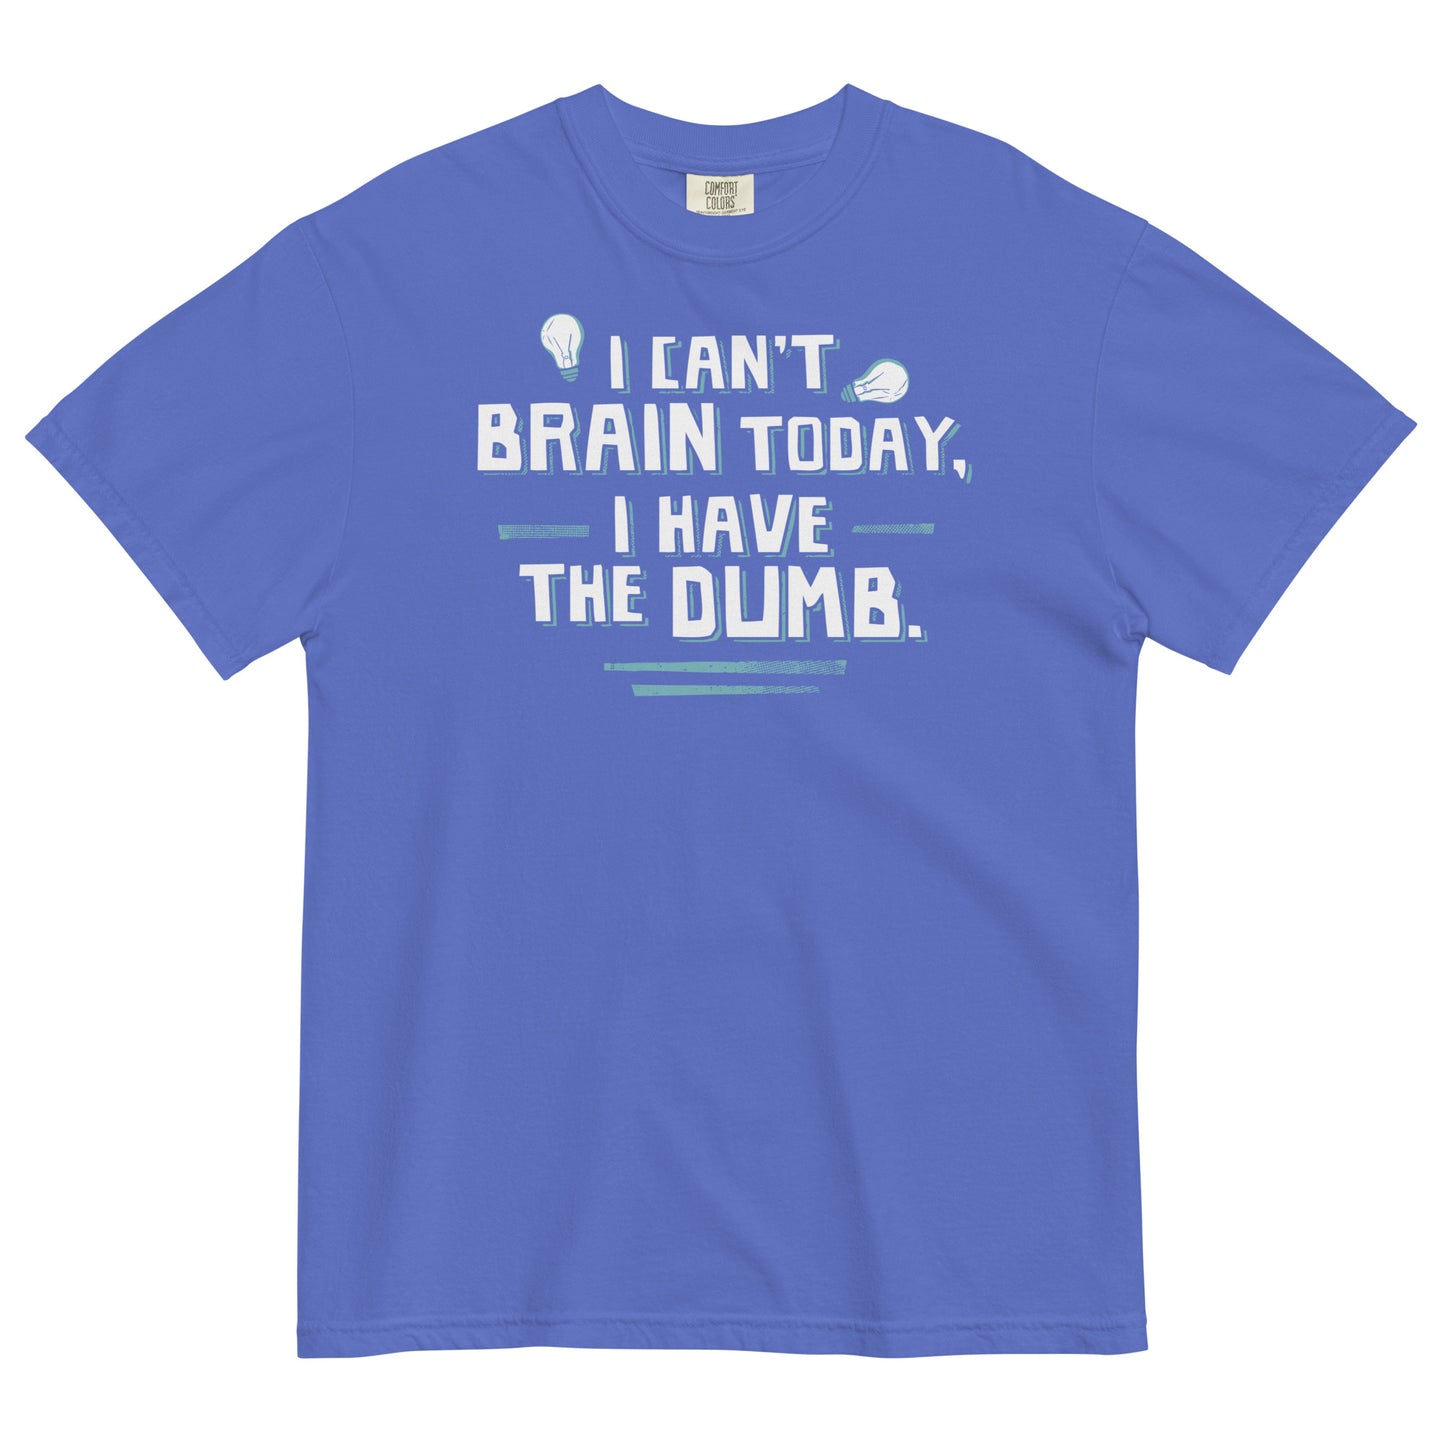 I Can't Brain Today, I Have The Dumb. Men's Relaxed Fit Tee